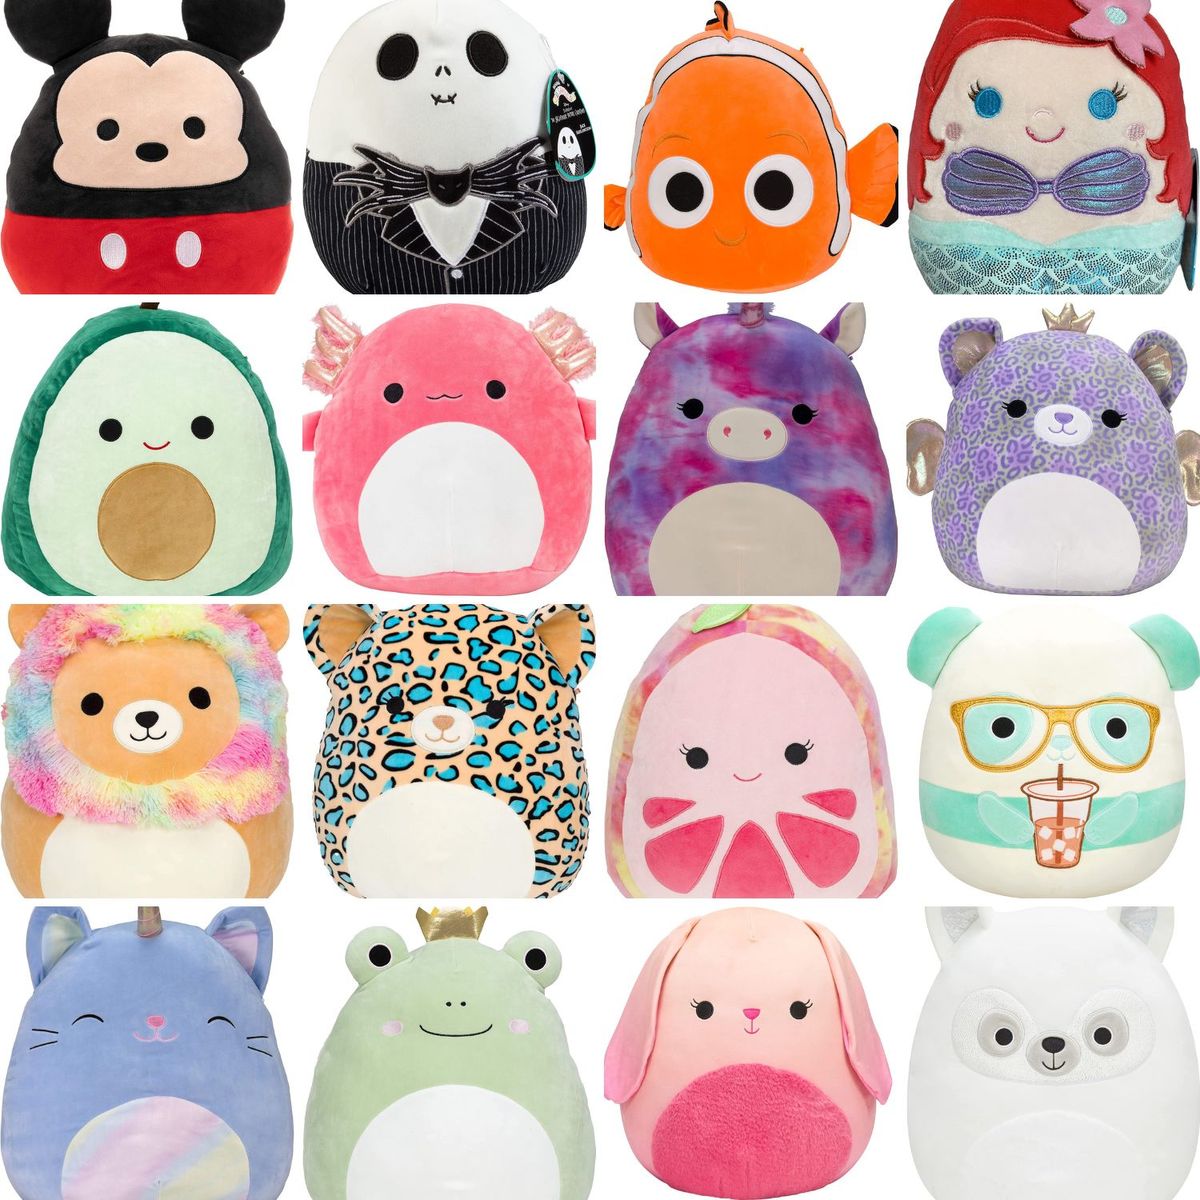 50 MUST HAVE Disney Squishmallows Before They Sell Out!